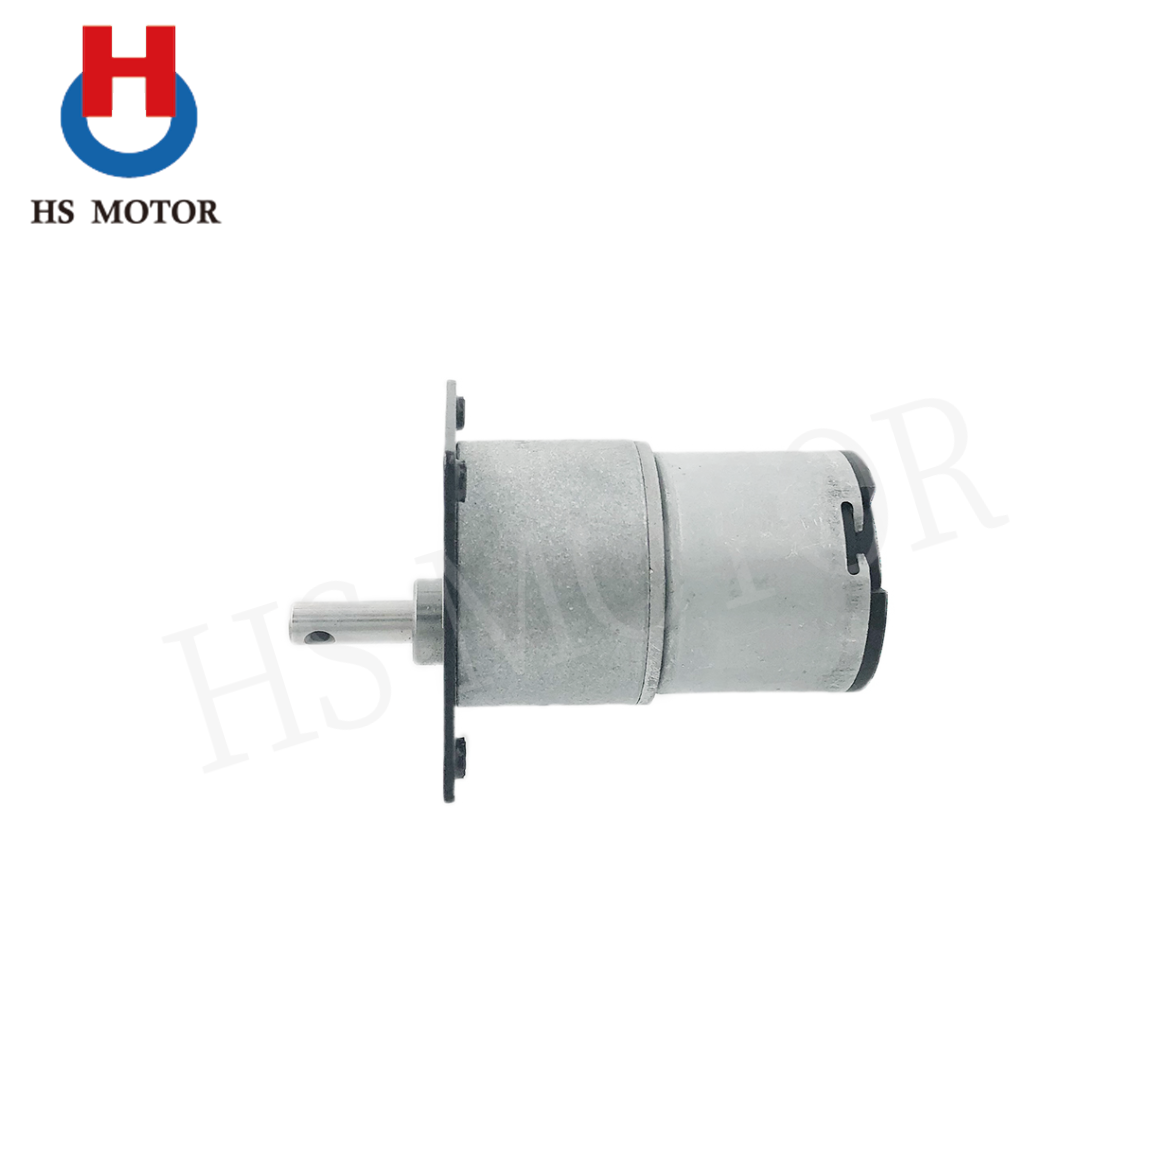 Tower-Type Gearbox Motor 37mm Spur Gearbox-3